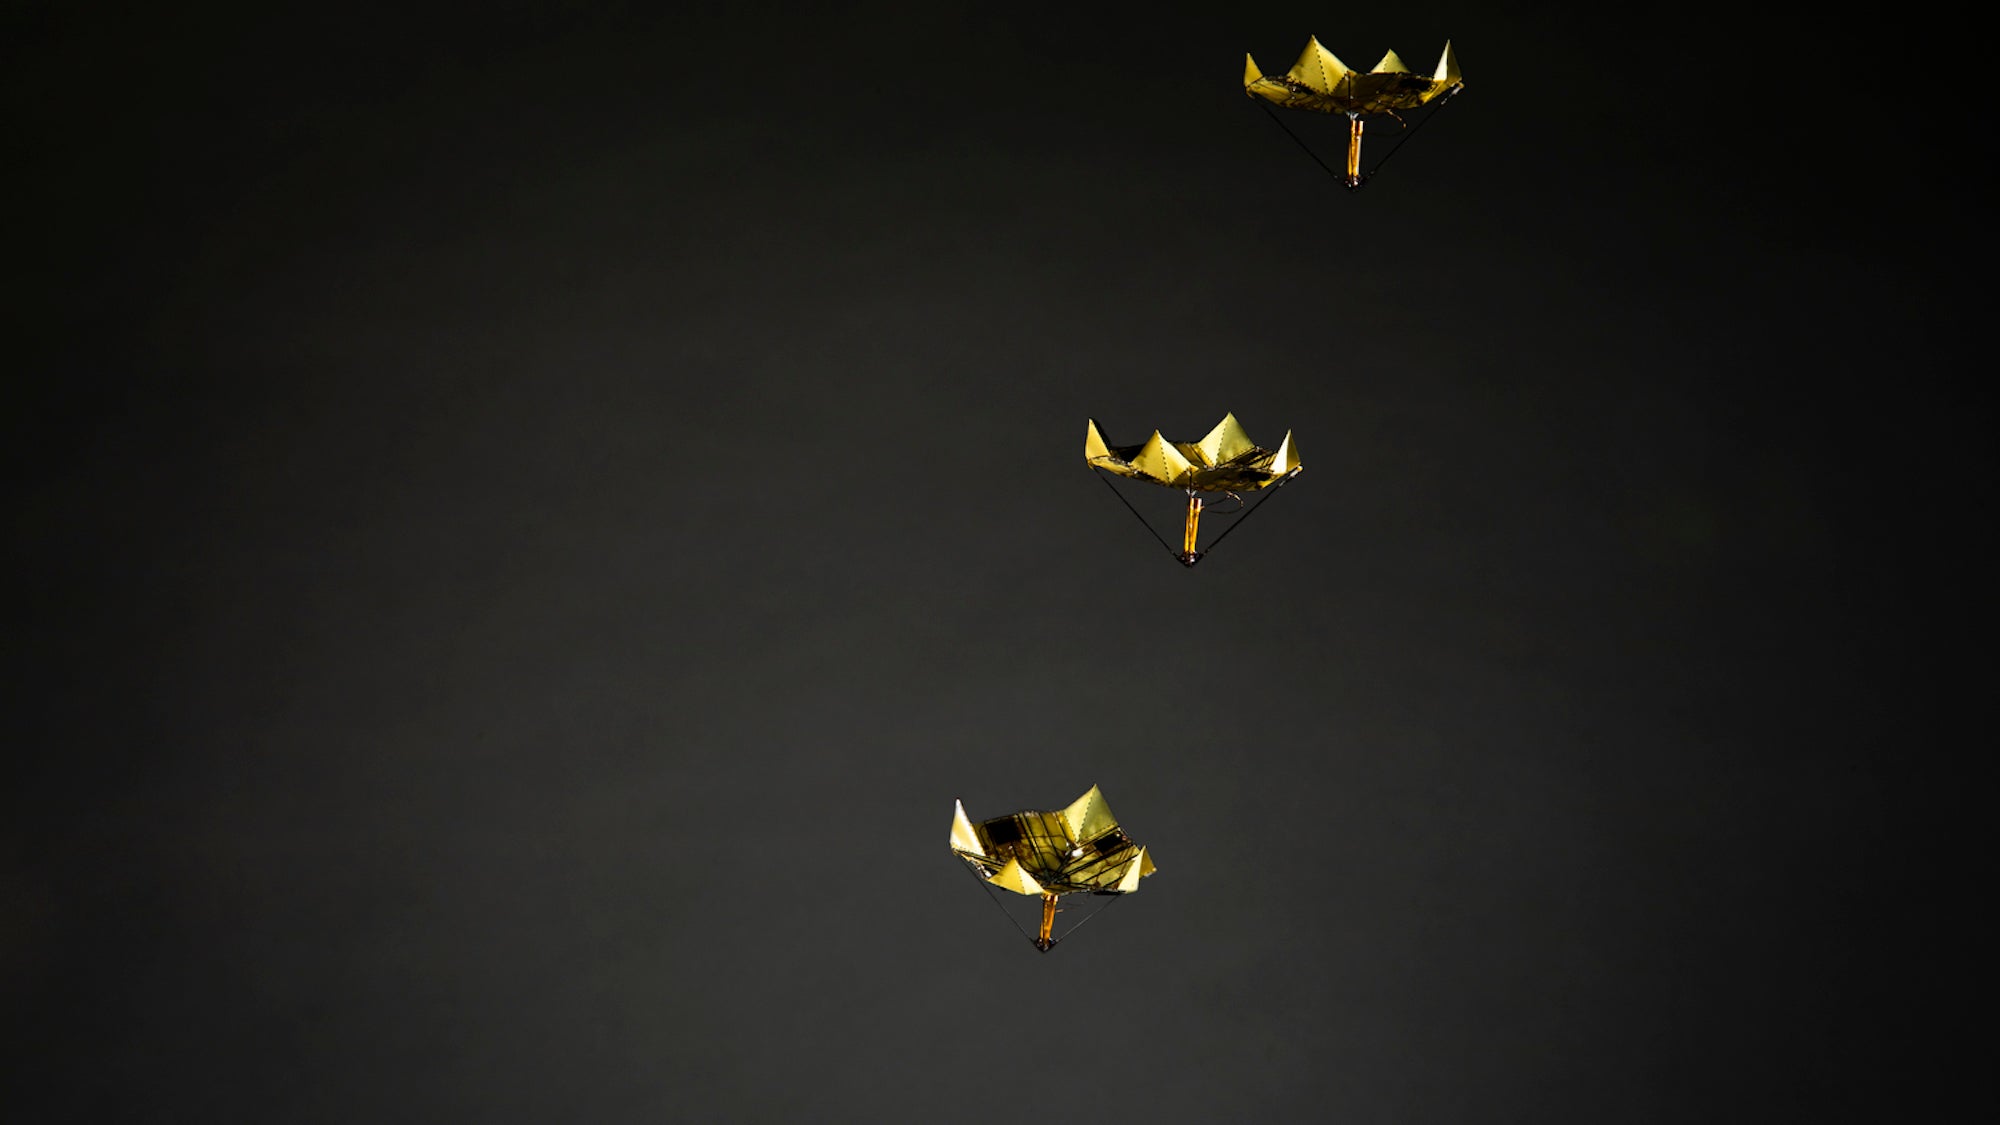 Microflier Robots Use The Science Of Origami To Fall Like Leaves